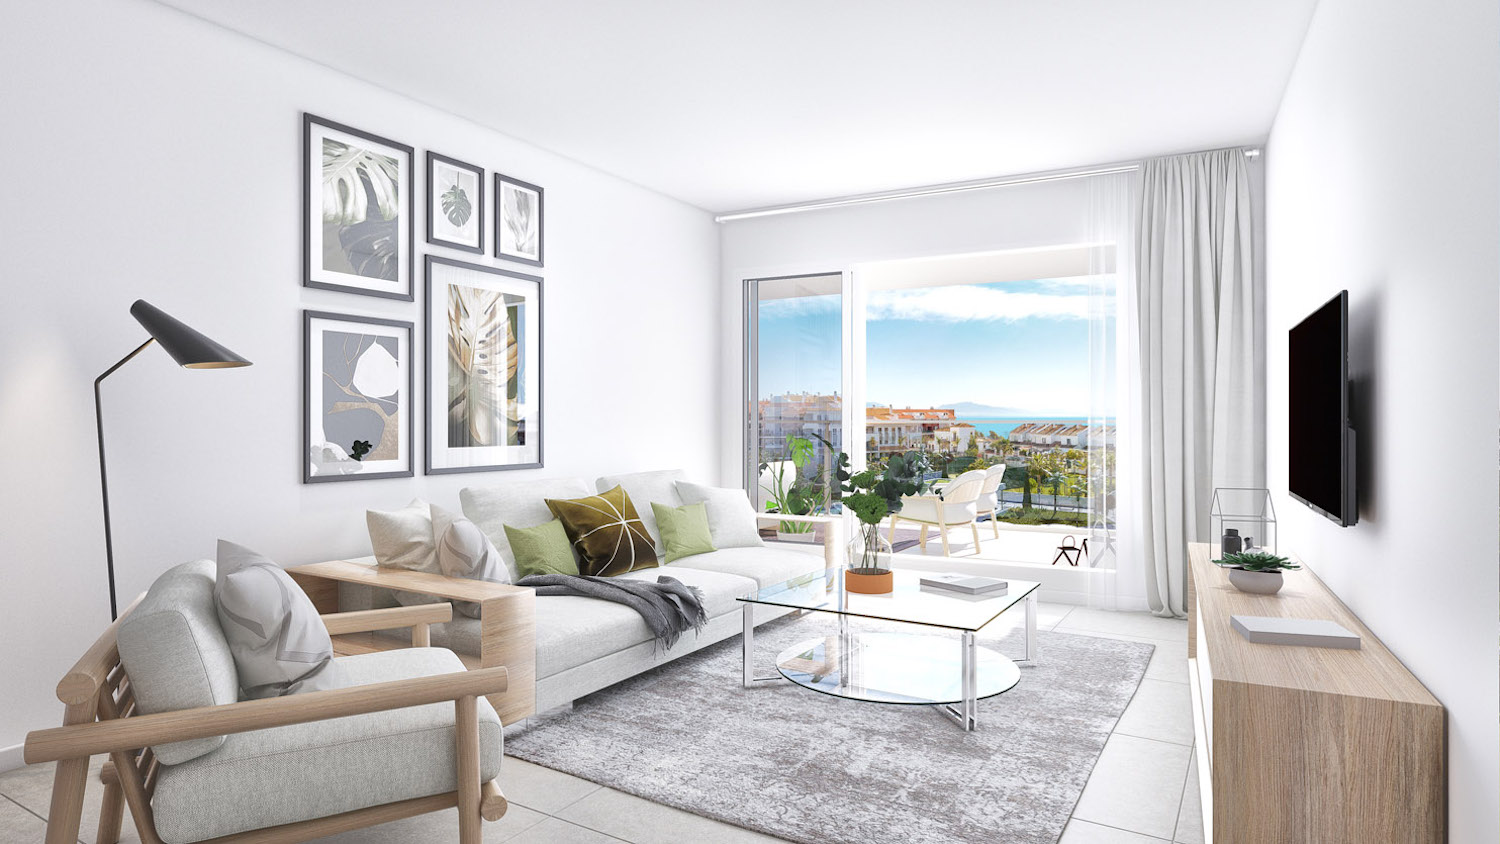 New and modern homes with sea views - Costa del Sol